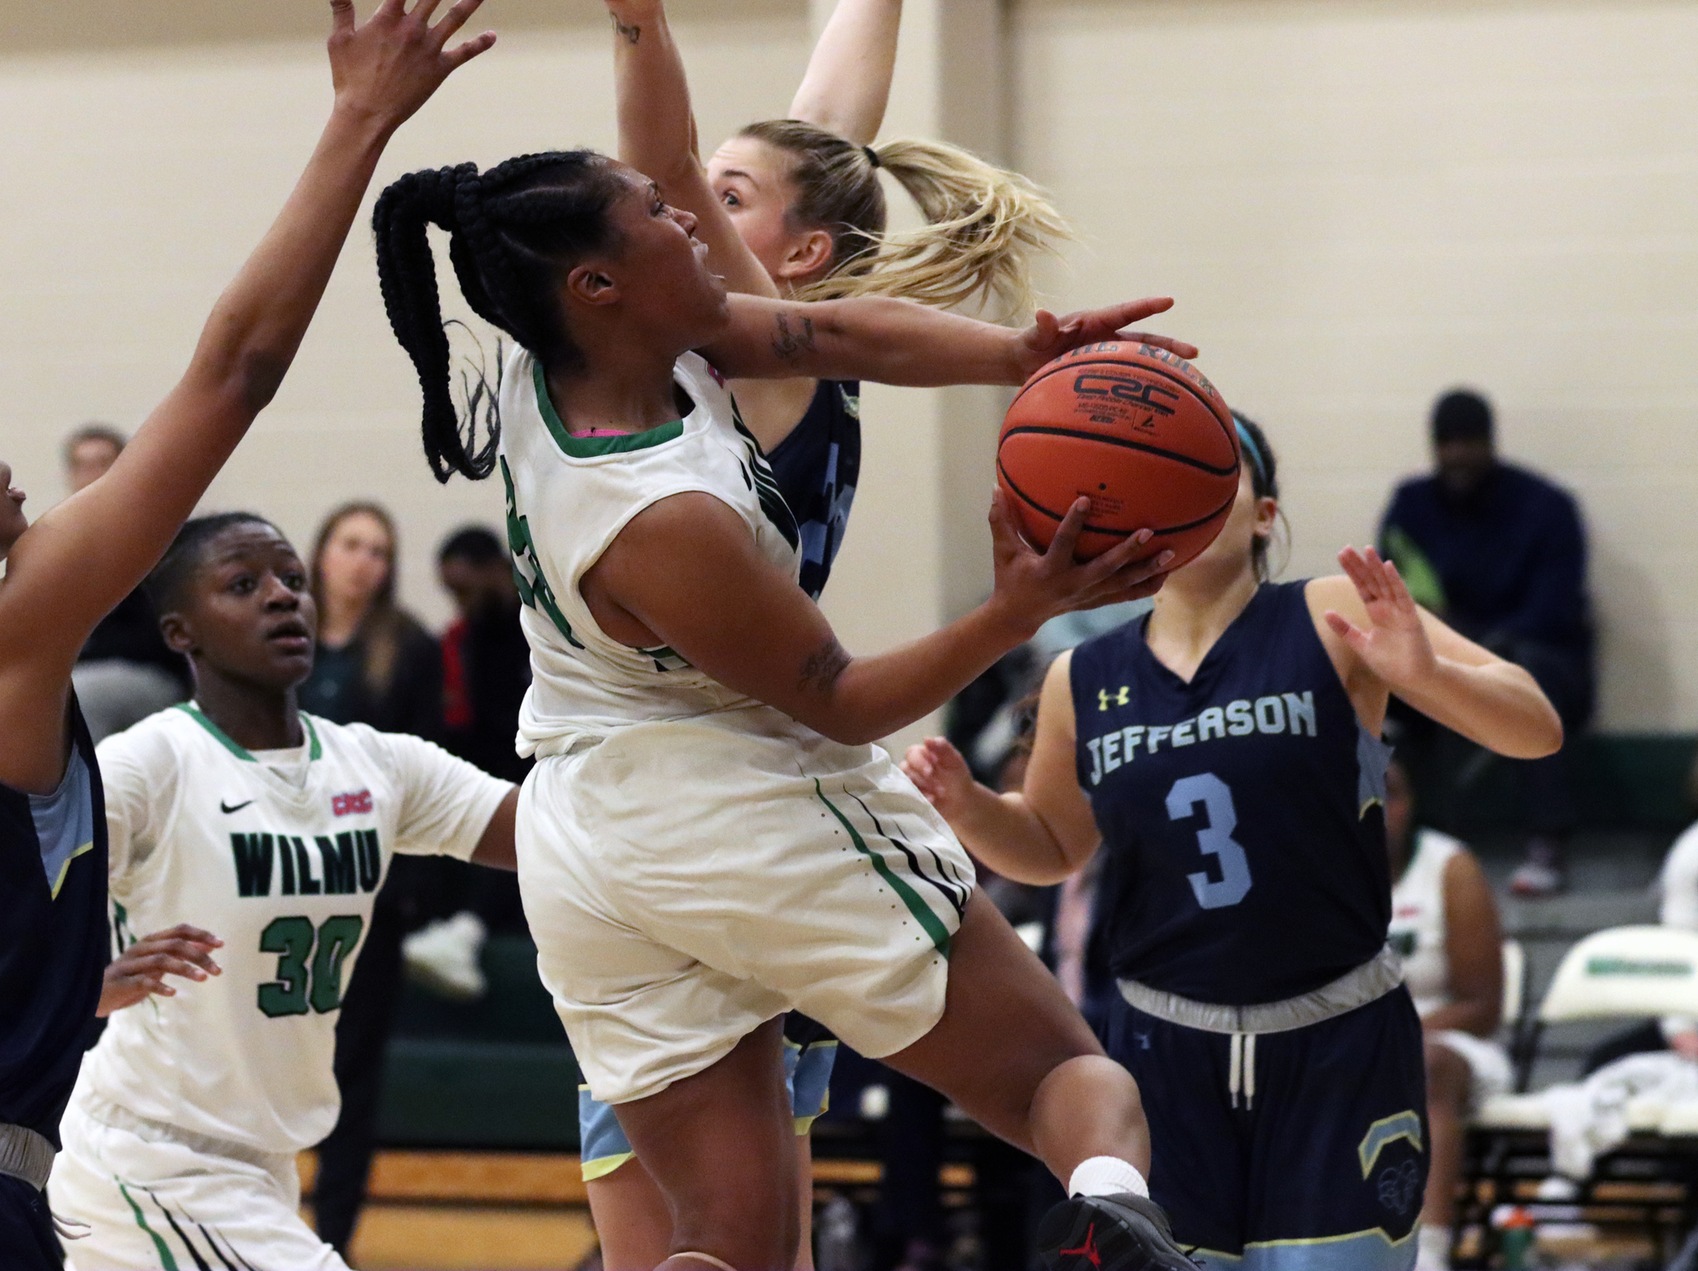 Photo of LaShyra Williams who secured a double-double with 24 points and 10 rebounds. Copyright 2020; Wilmington University. All rights reserved. Photo by Laura Gil. February 12, 2020 vs. Jefferson.